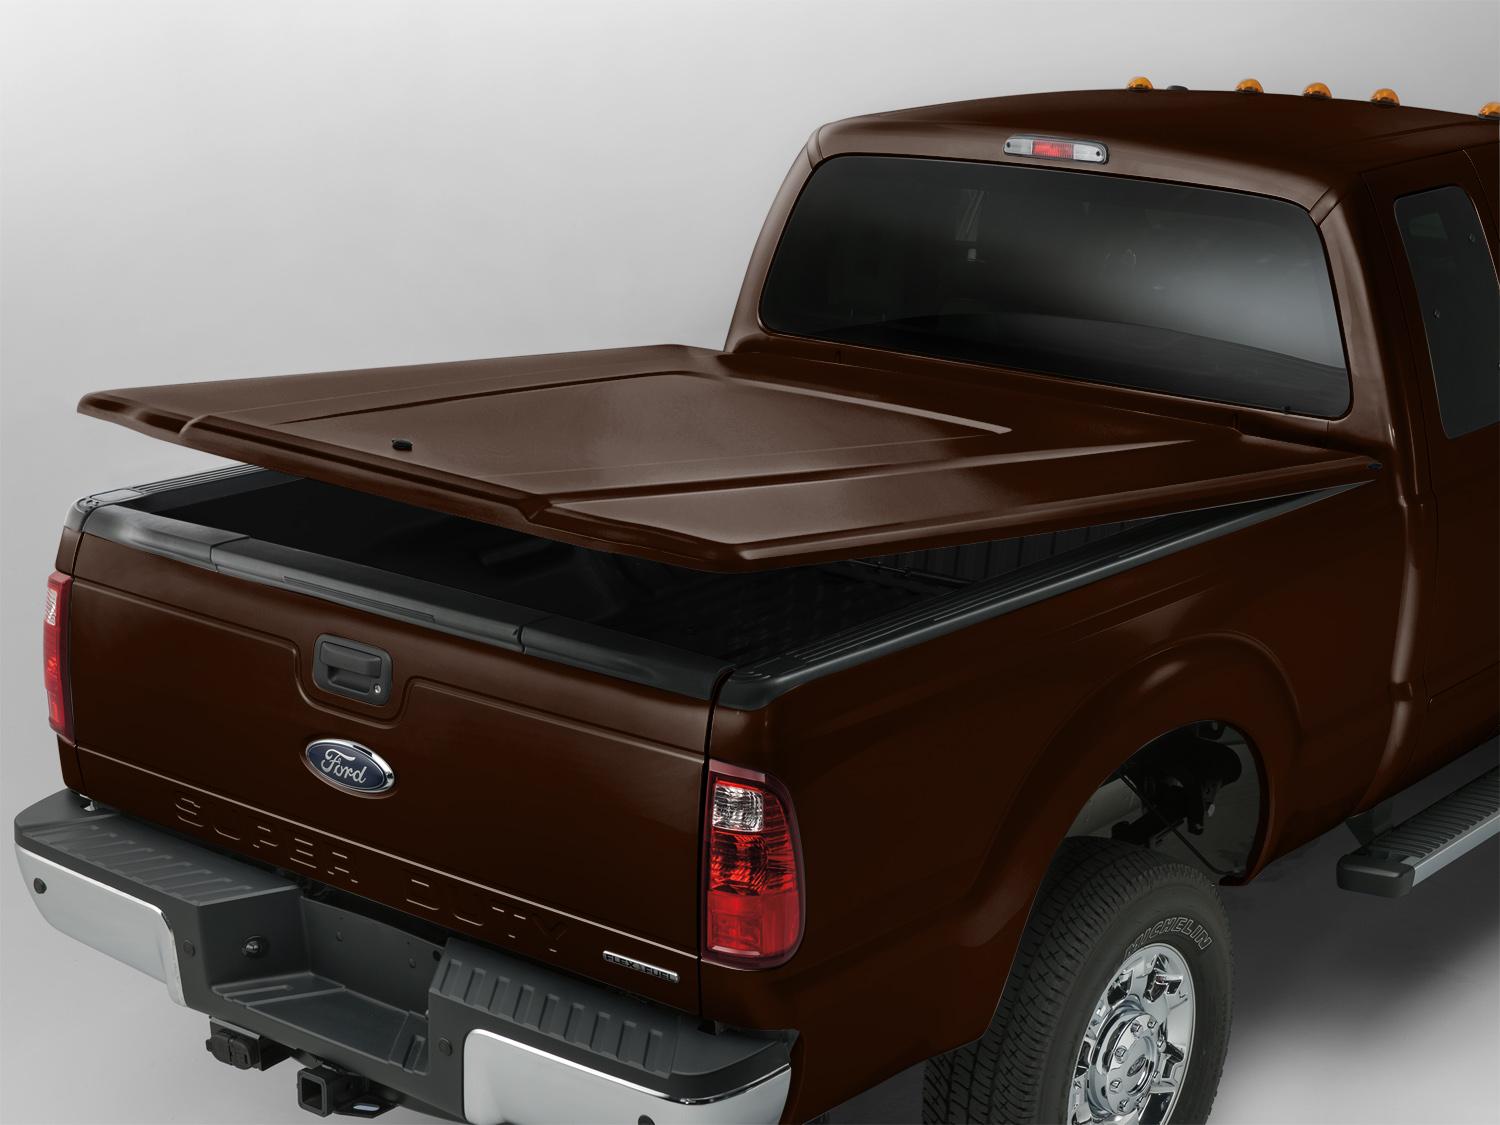 Image for Tonneau/Bed Covers - Hard Painted by UnderCover, 6.5 Short Bed, Kodiak Brown from AccessoriesCanada